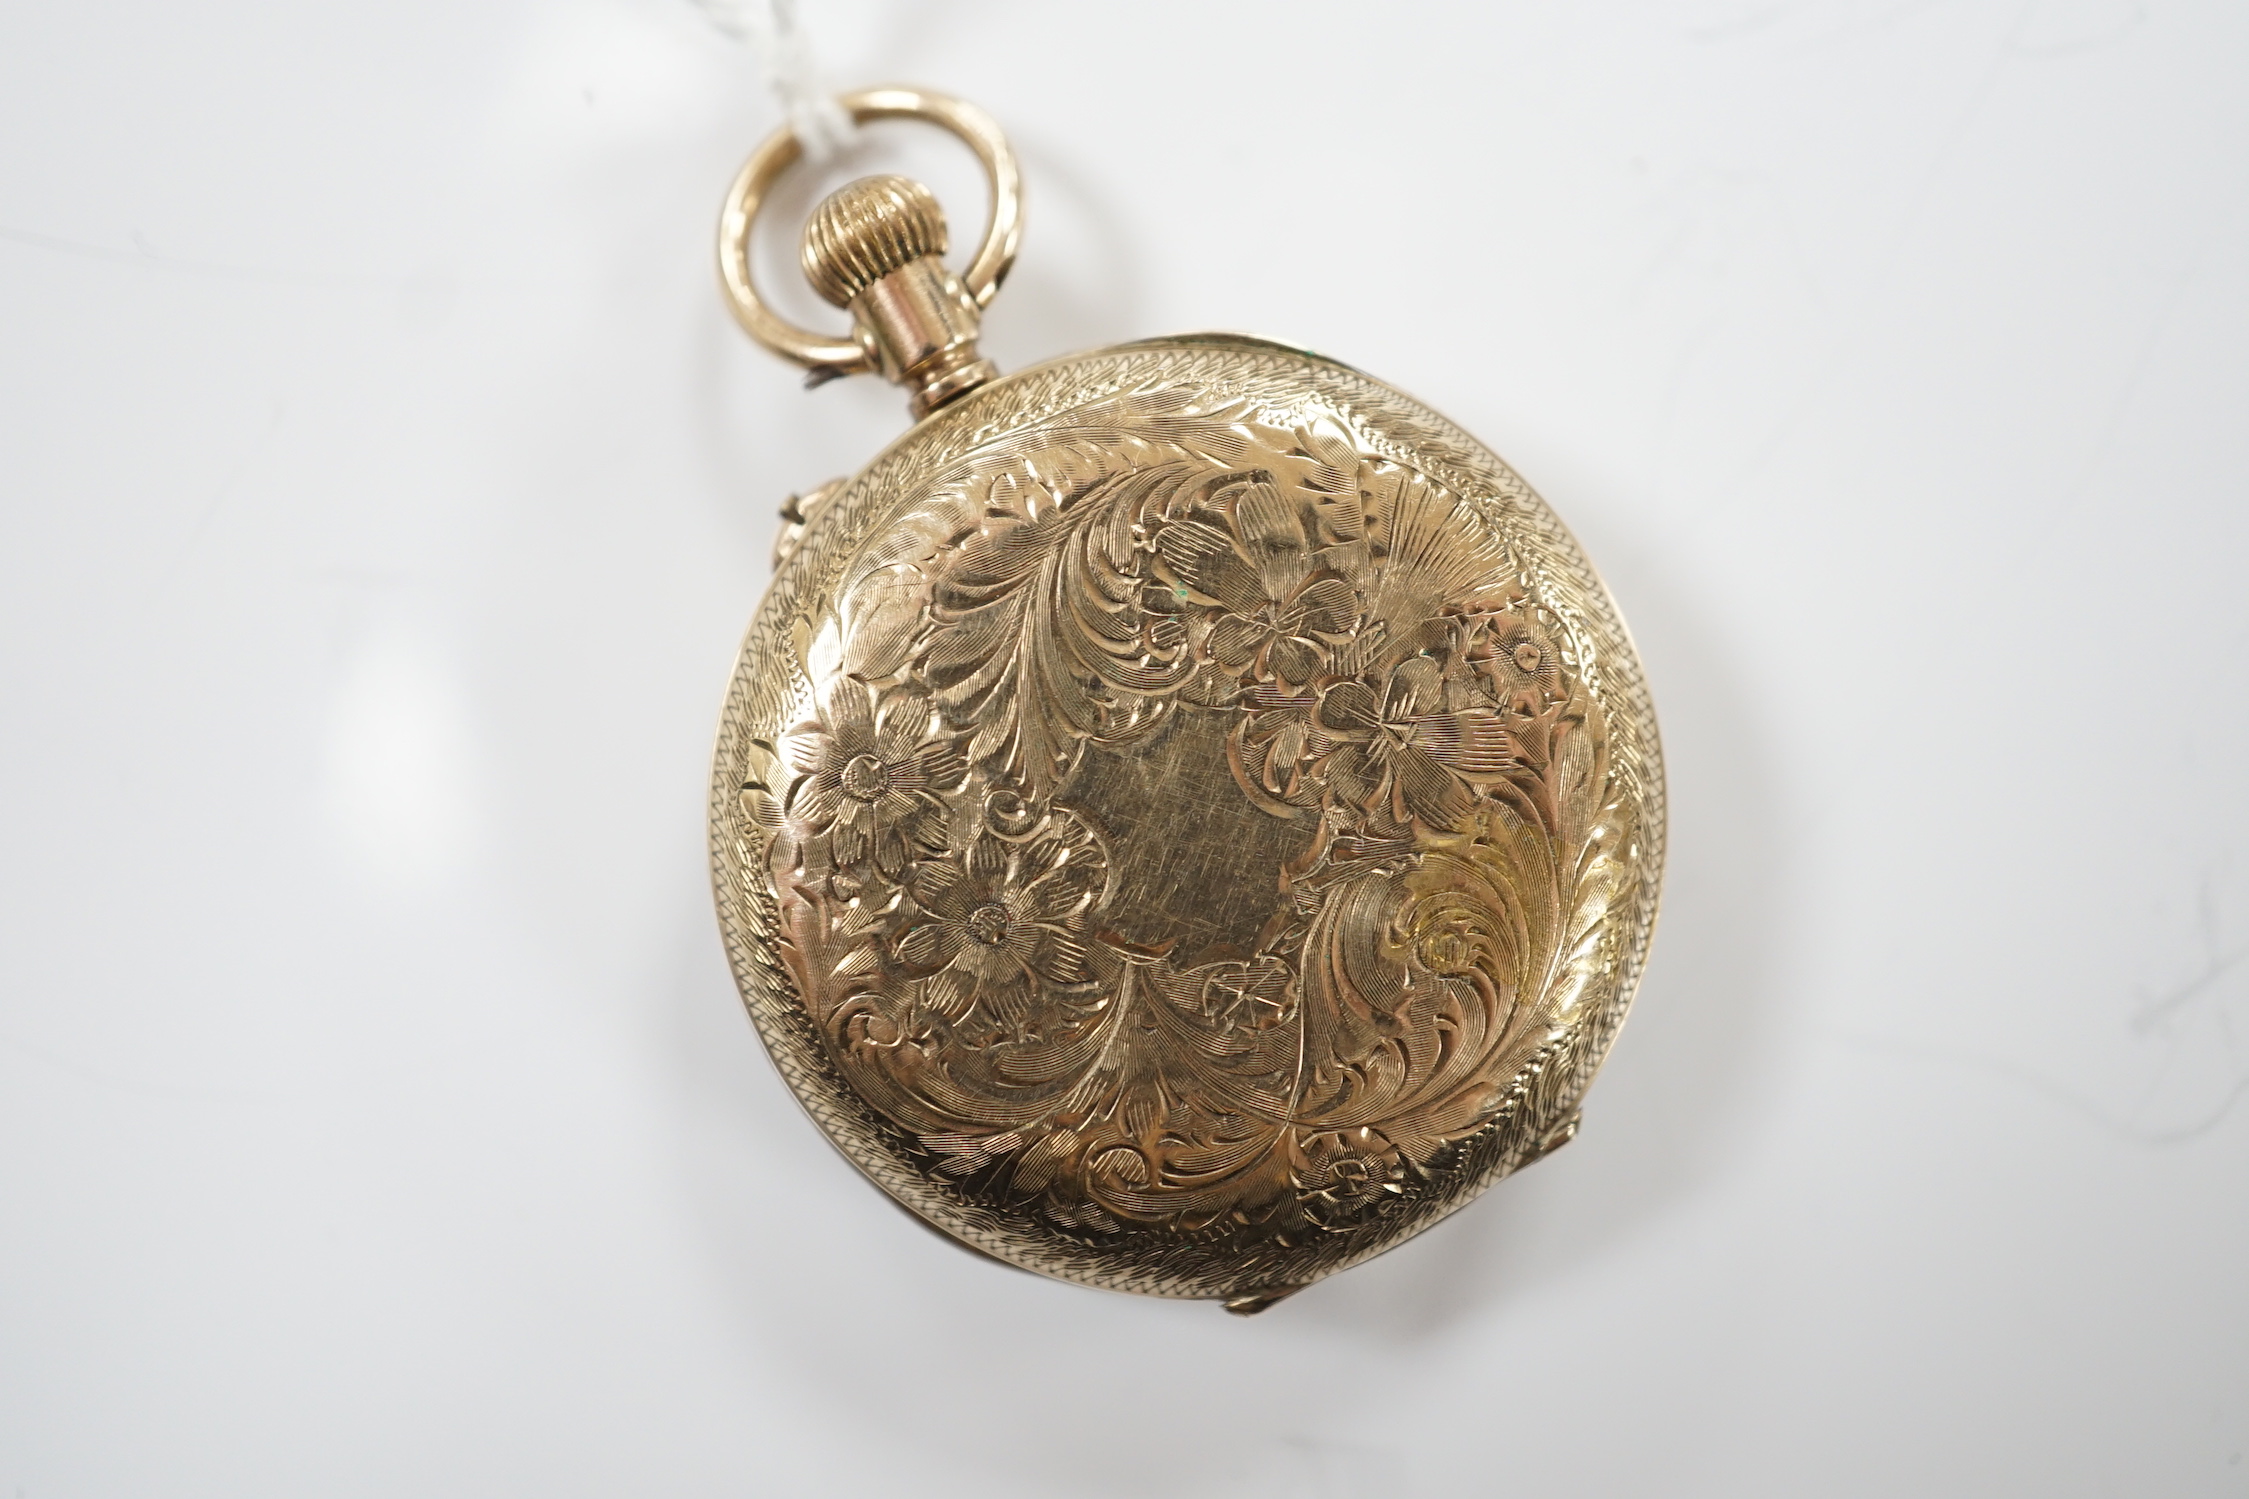 A Swiss 9ct gold open face fob watch, with Roman dial, glass loose, gross weight 26.3 grams.